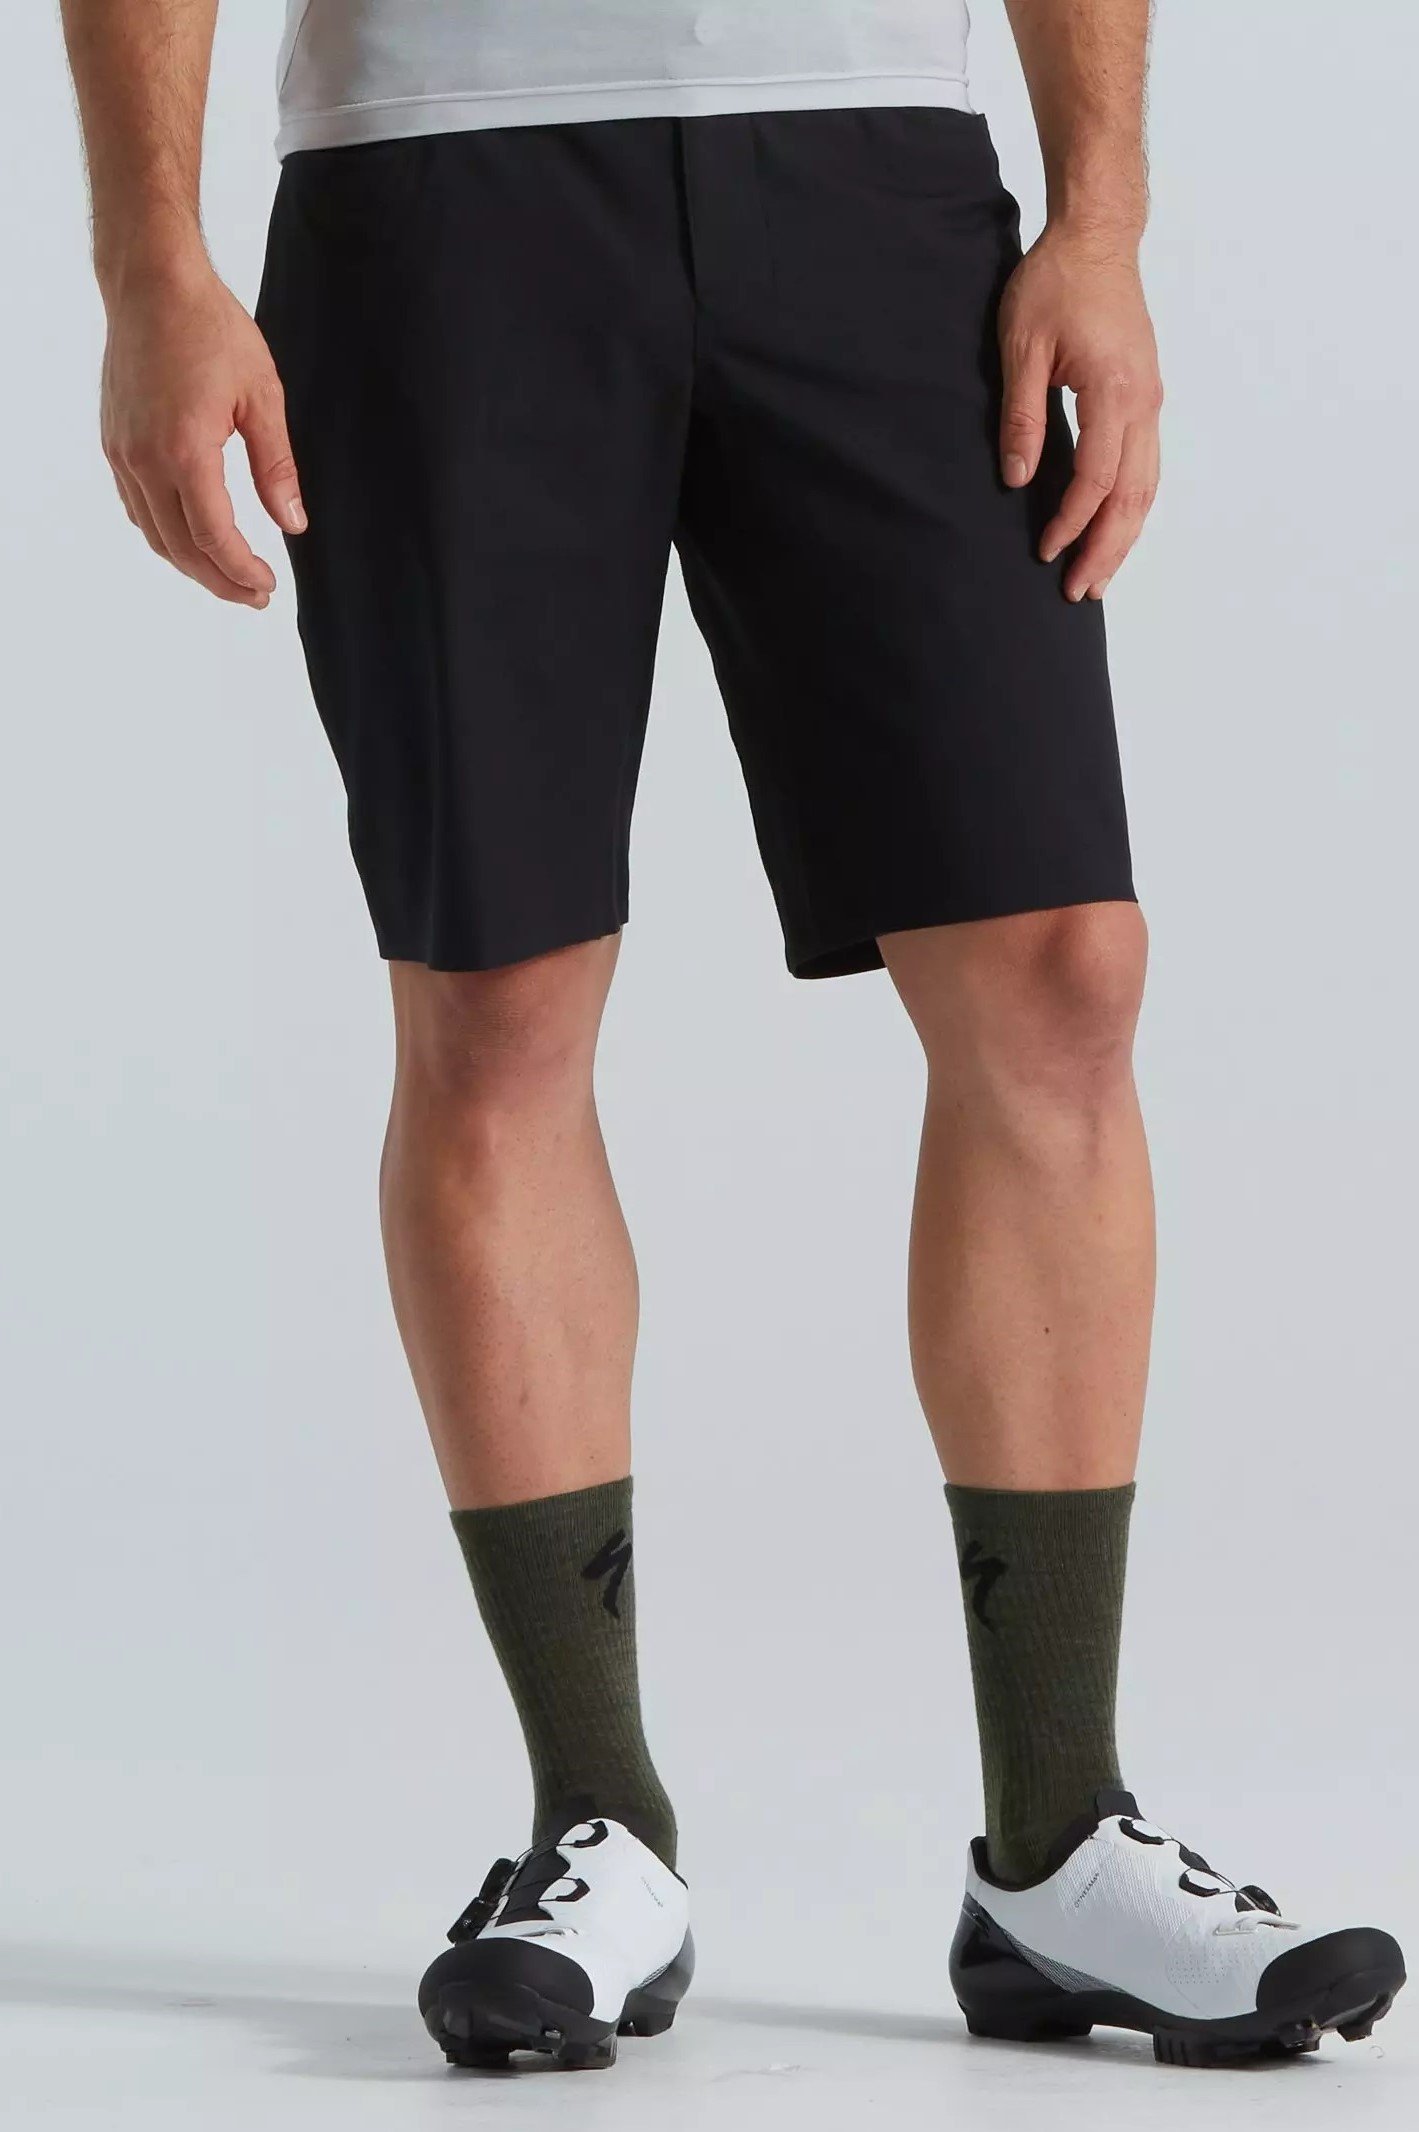 Specialized RBX Adventure Over Shorts M